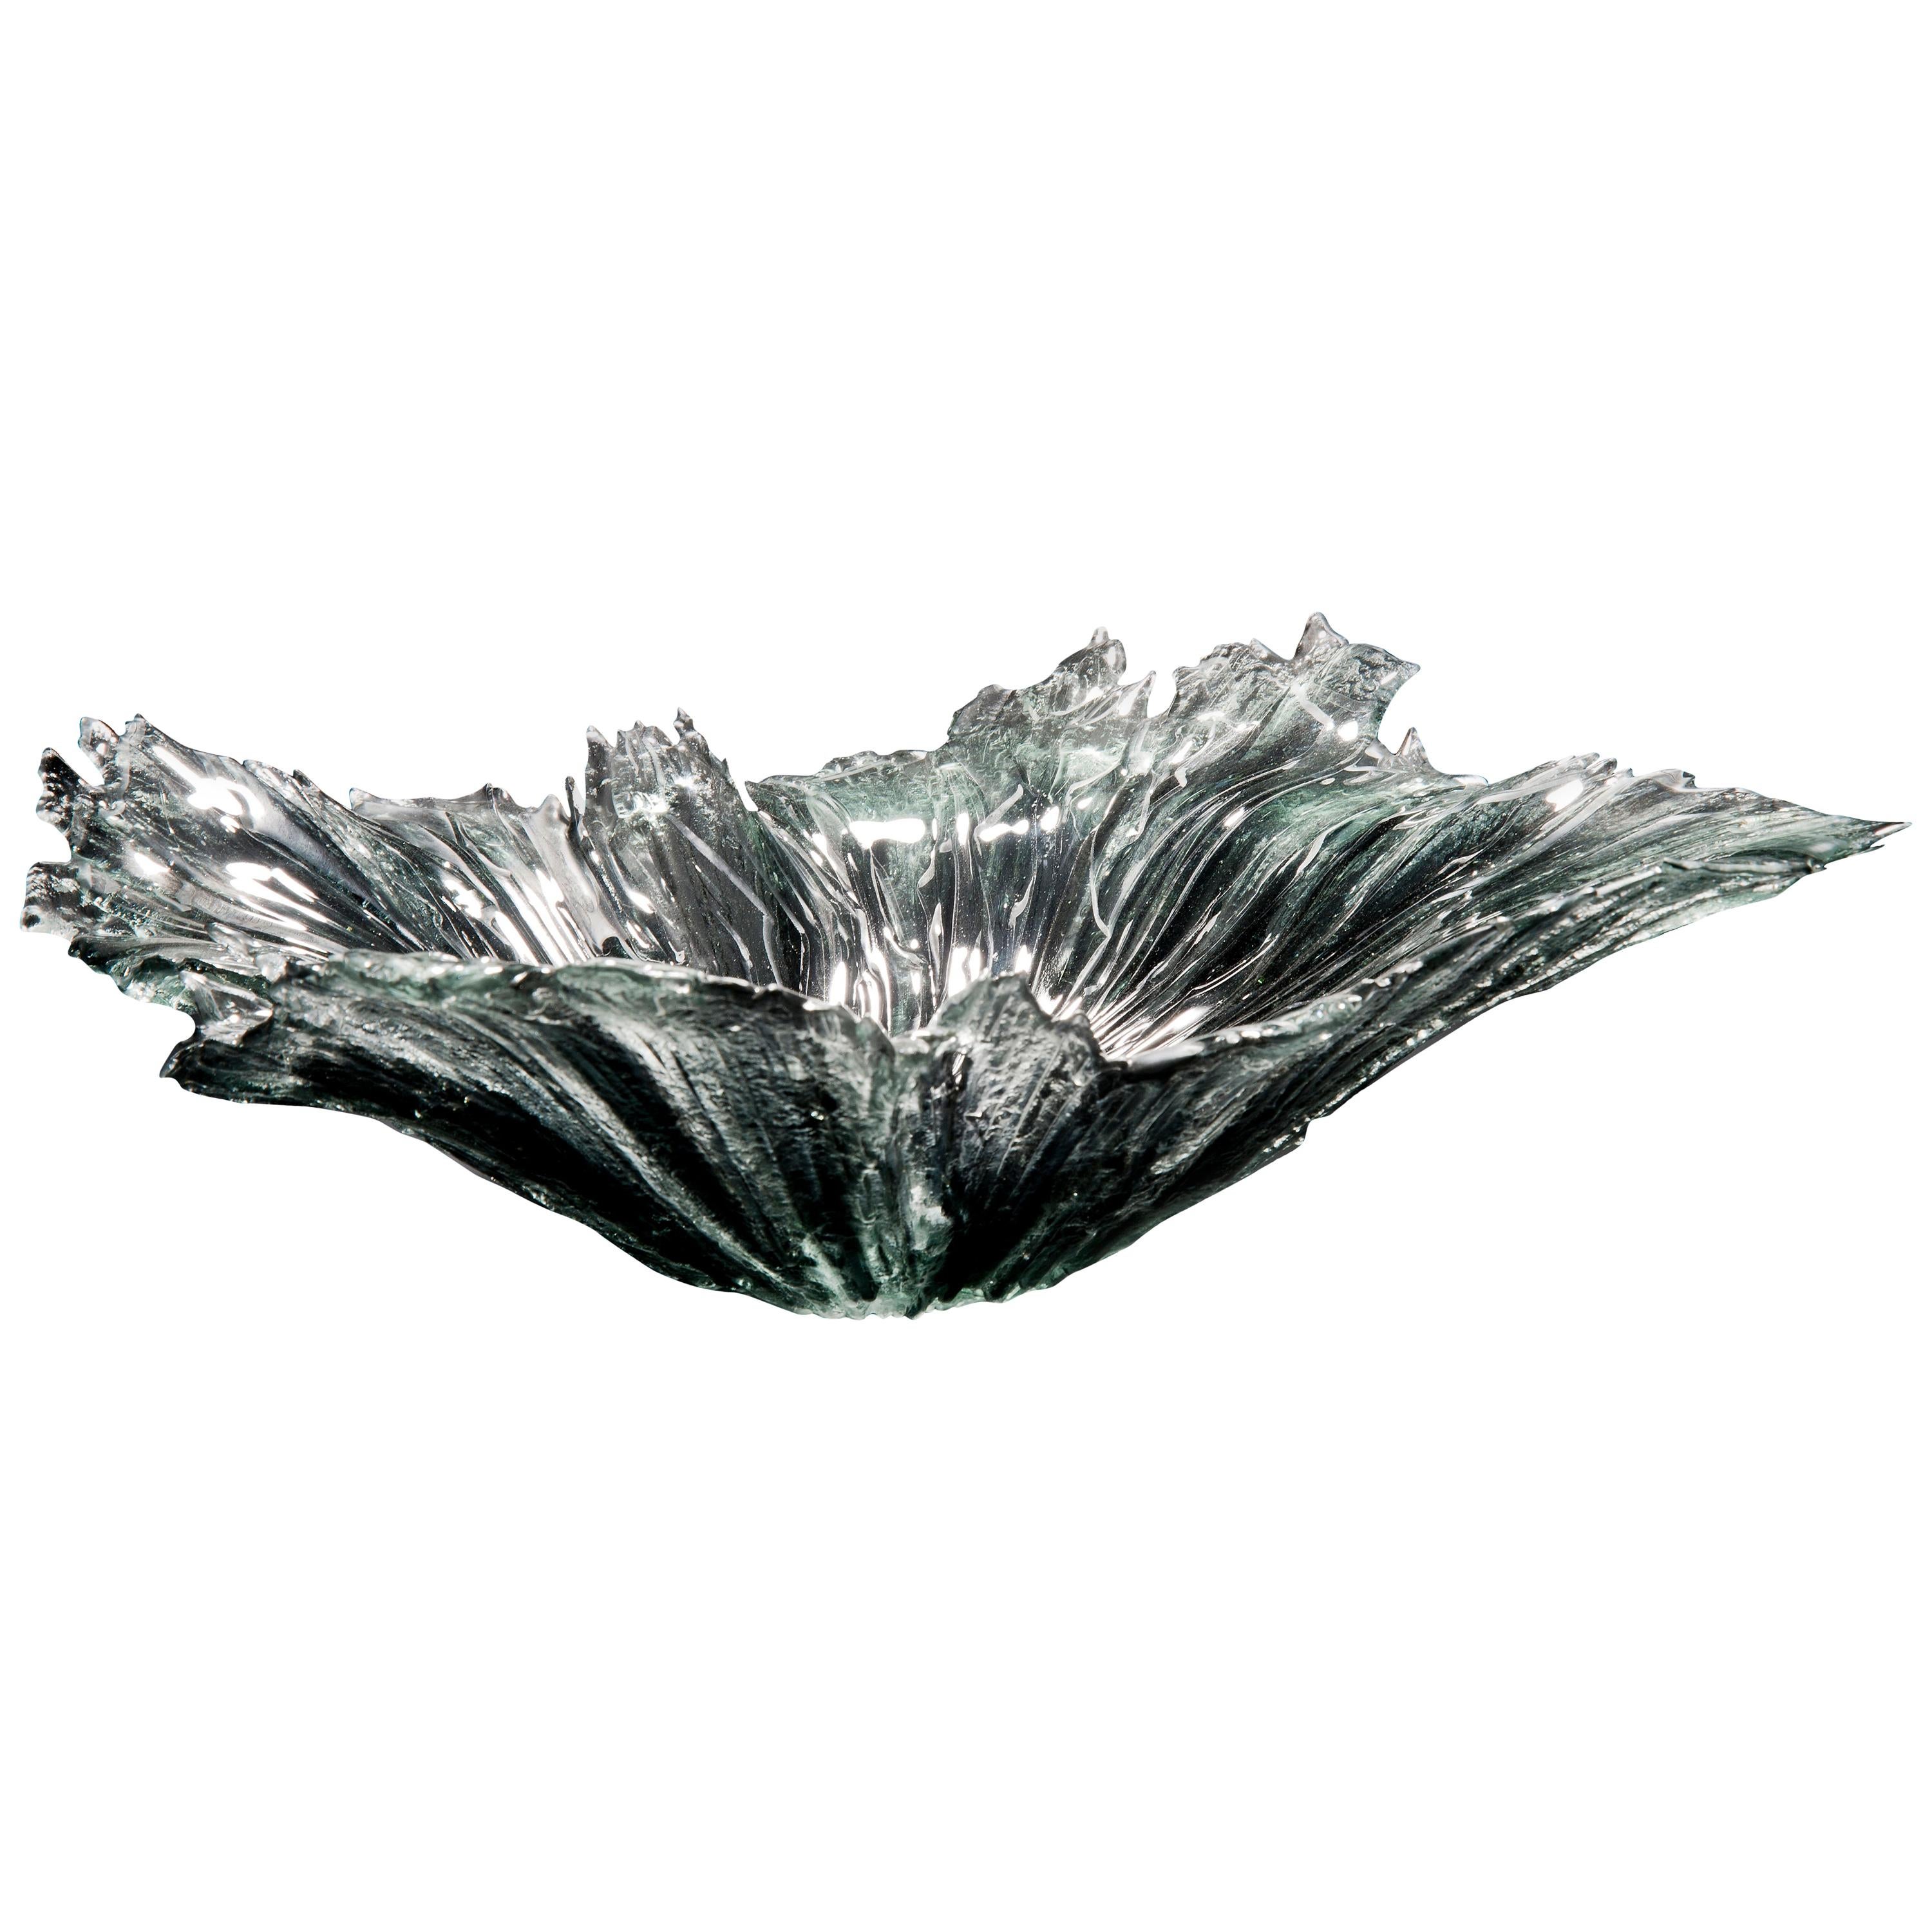 Coral Bowl in Grey, a Unique Grey and Clear Glass Centrepiece by Wayne Charmer